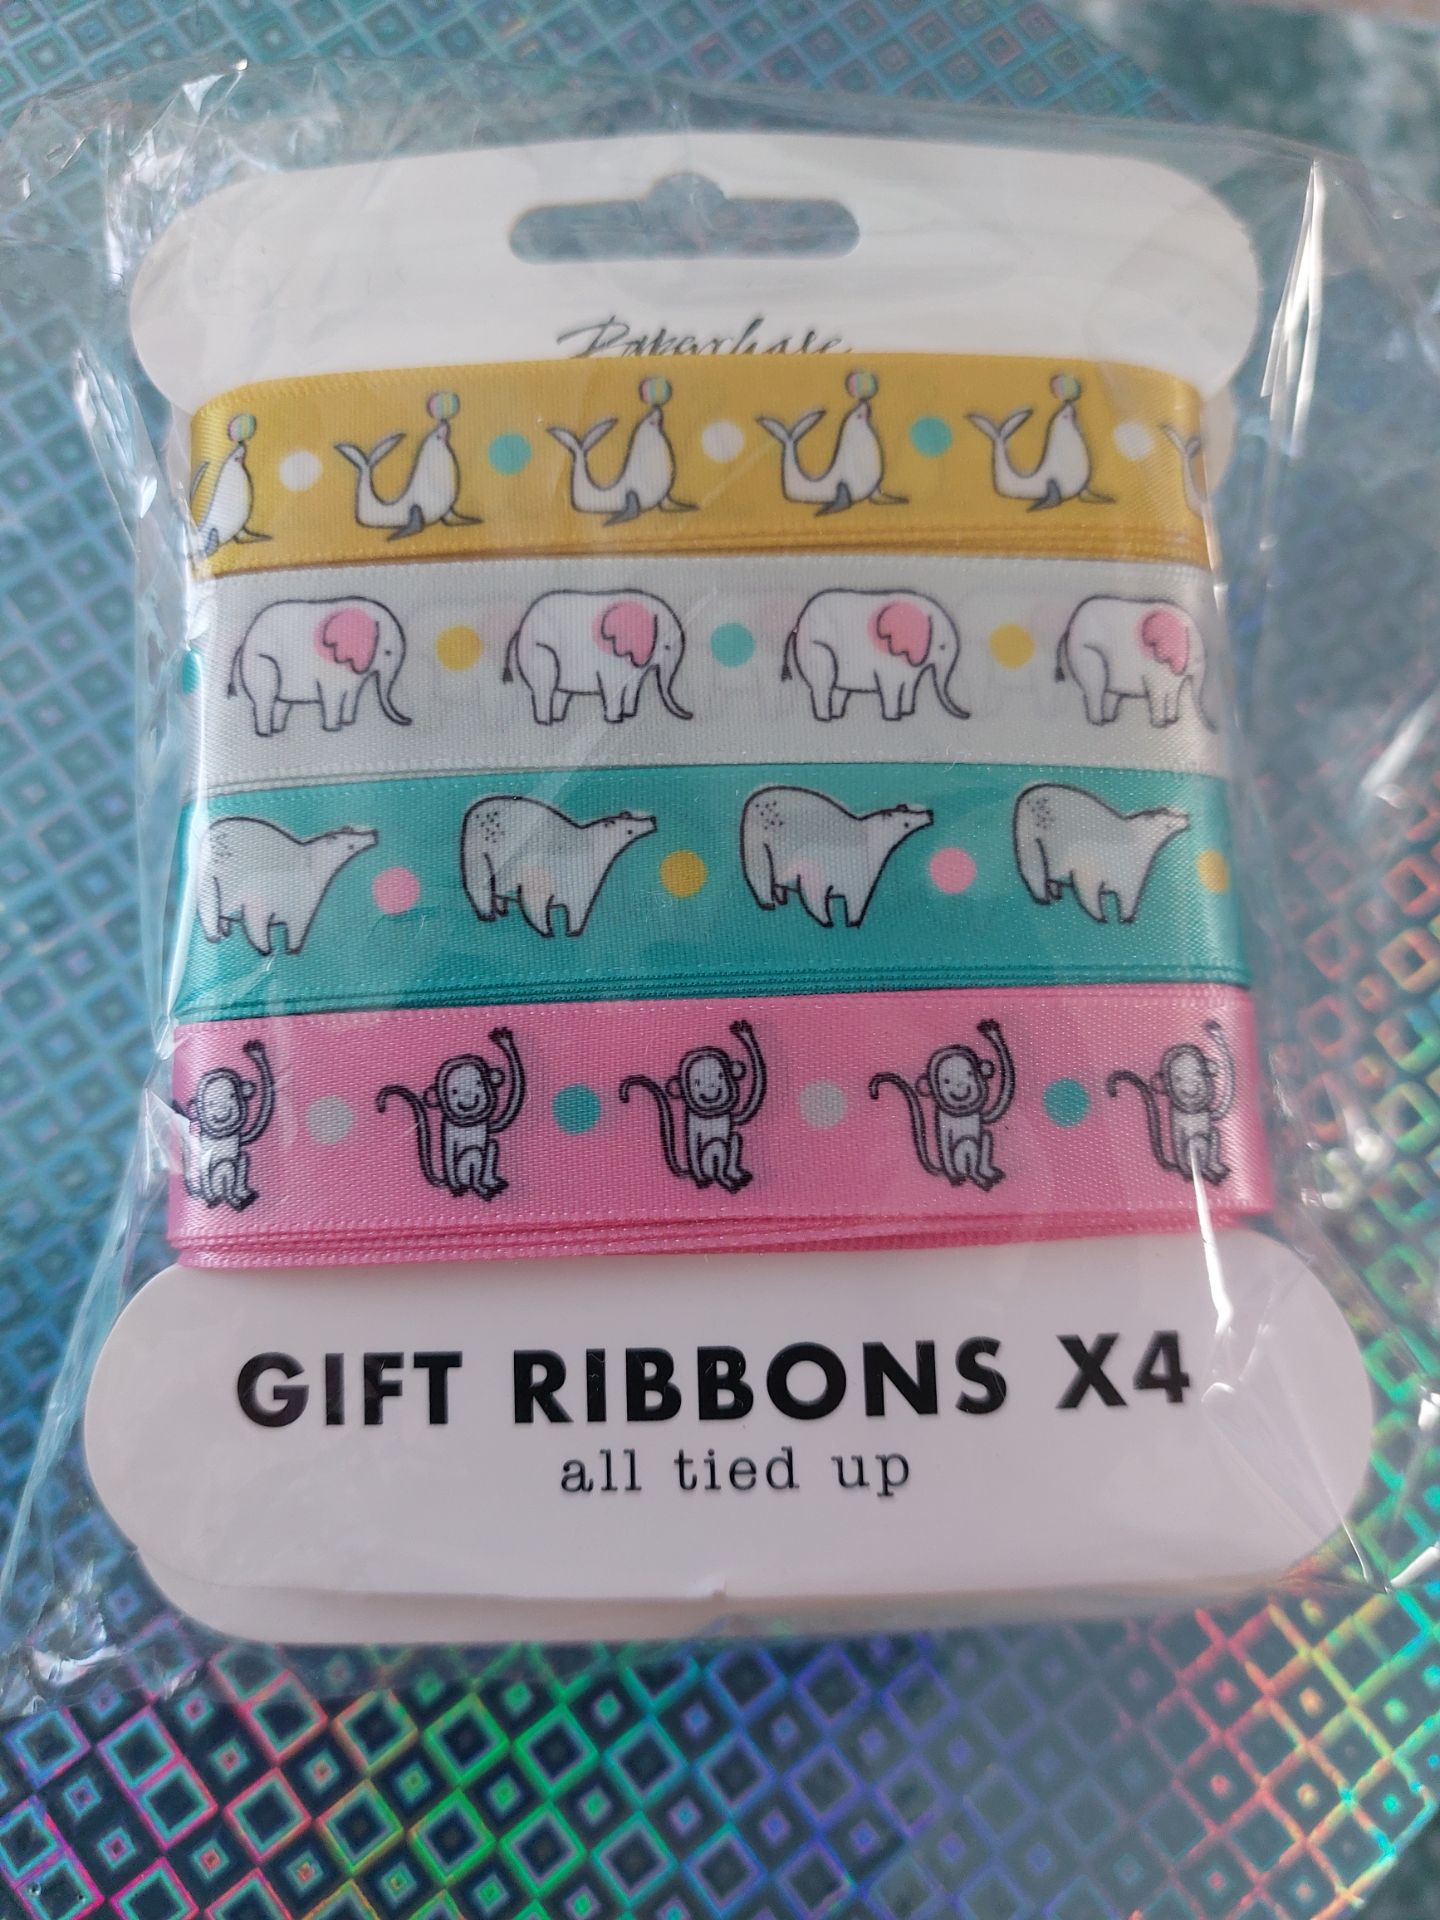 Novelty Animal Baby Ribbons From Paperchase x 8 Cards of 4 - Image 3 of 3